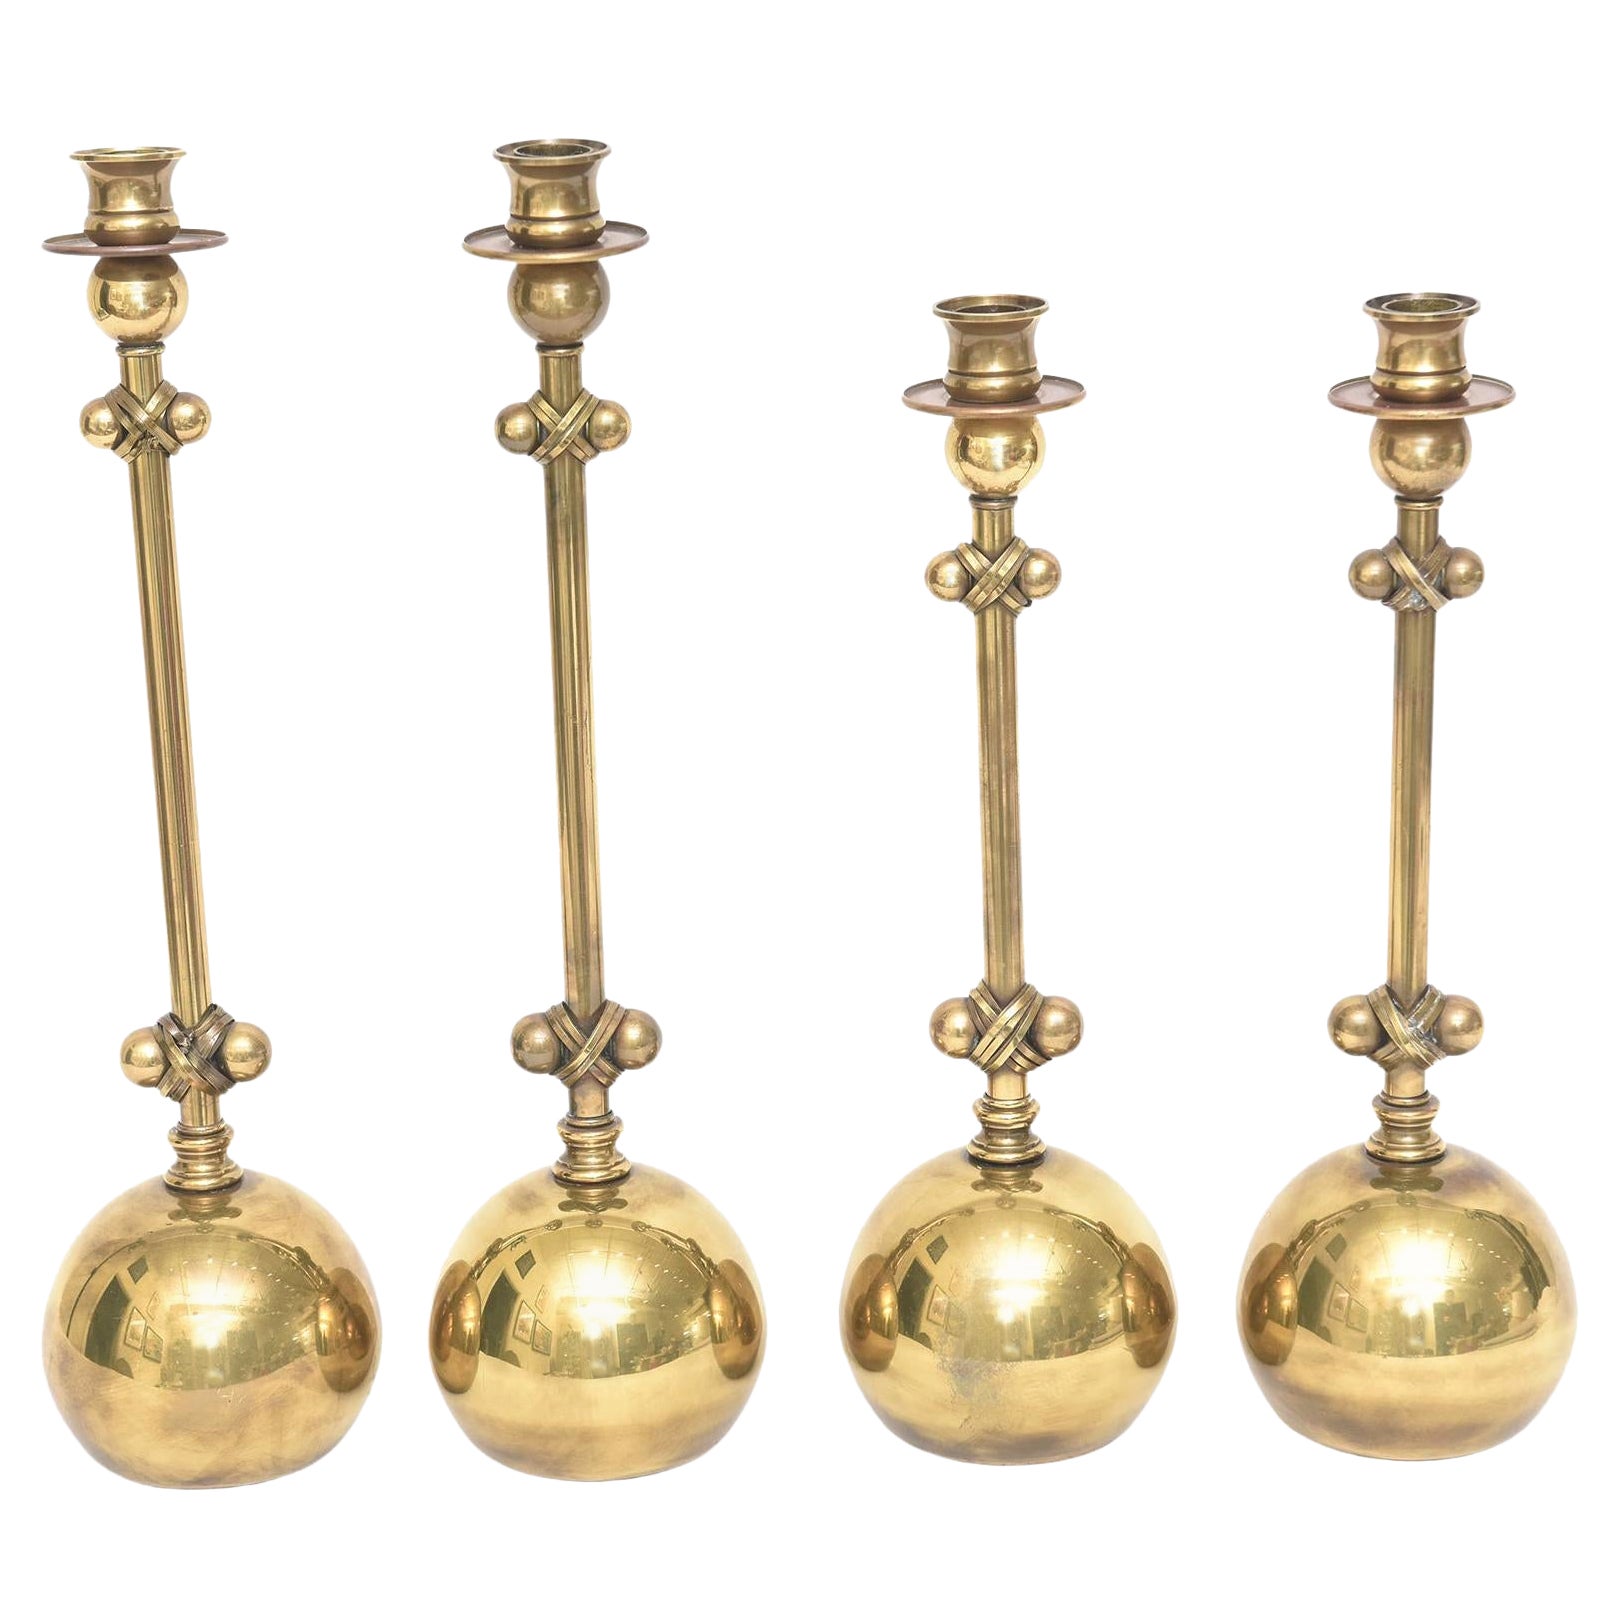 Vintage Chapman Brass Ball and Campaign Candlesticks Set of 4